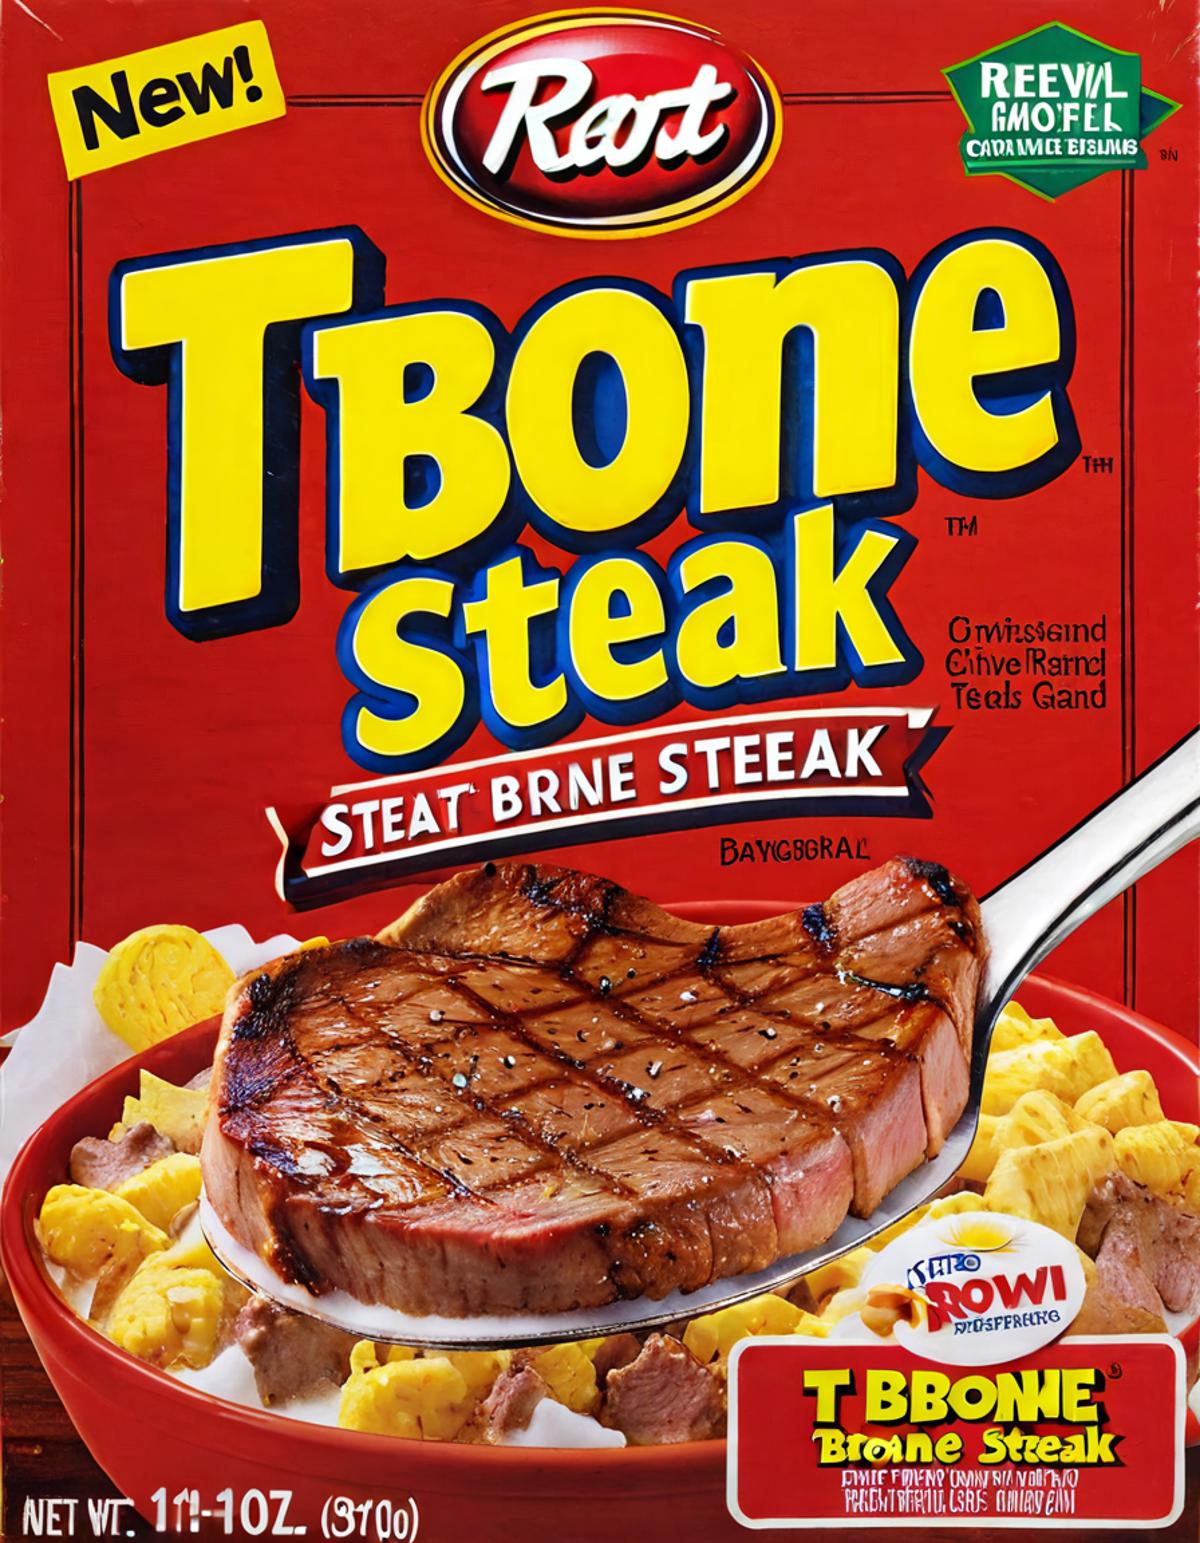 A box of TBone Steak meal with a knife and fork.